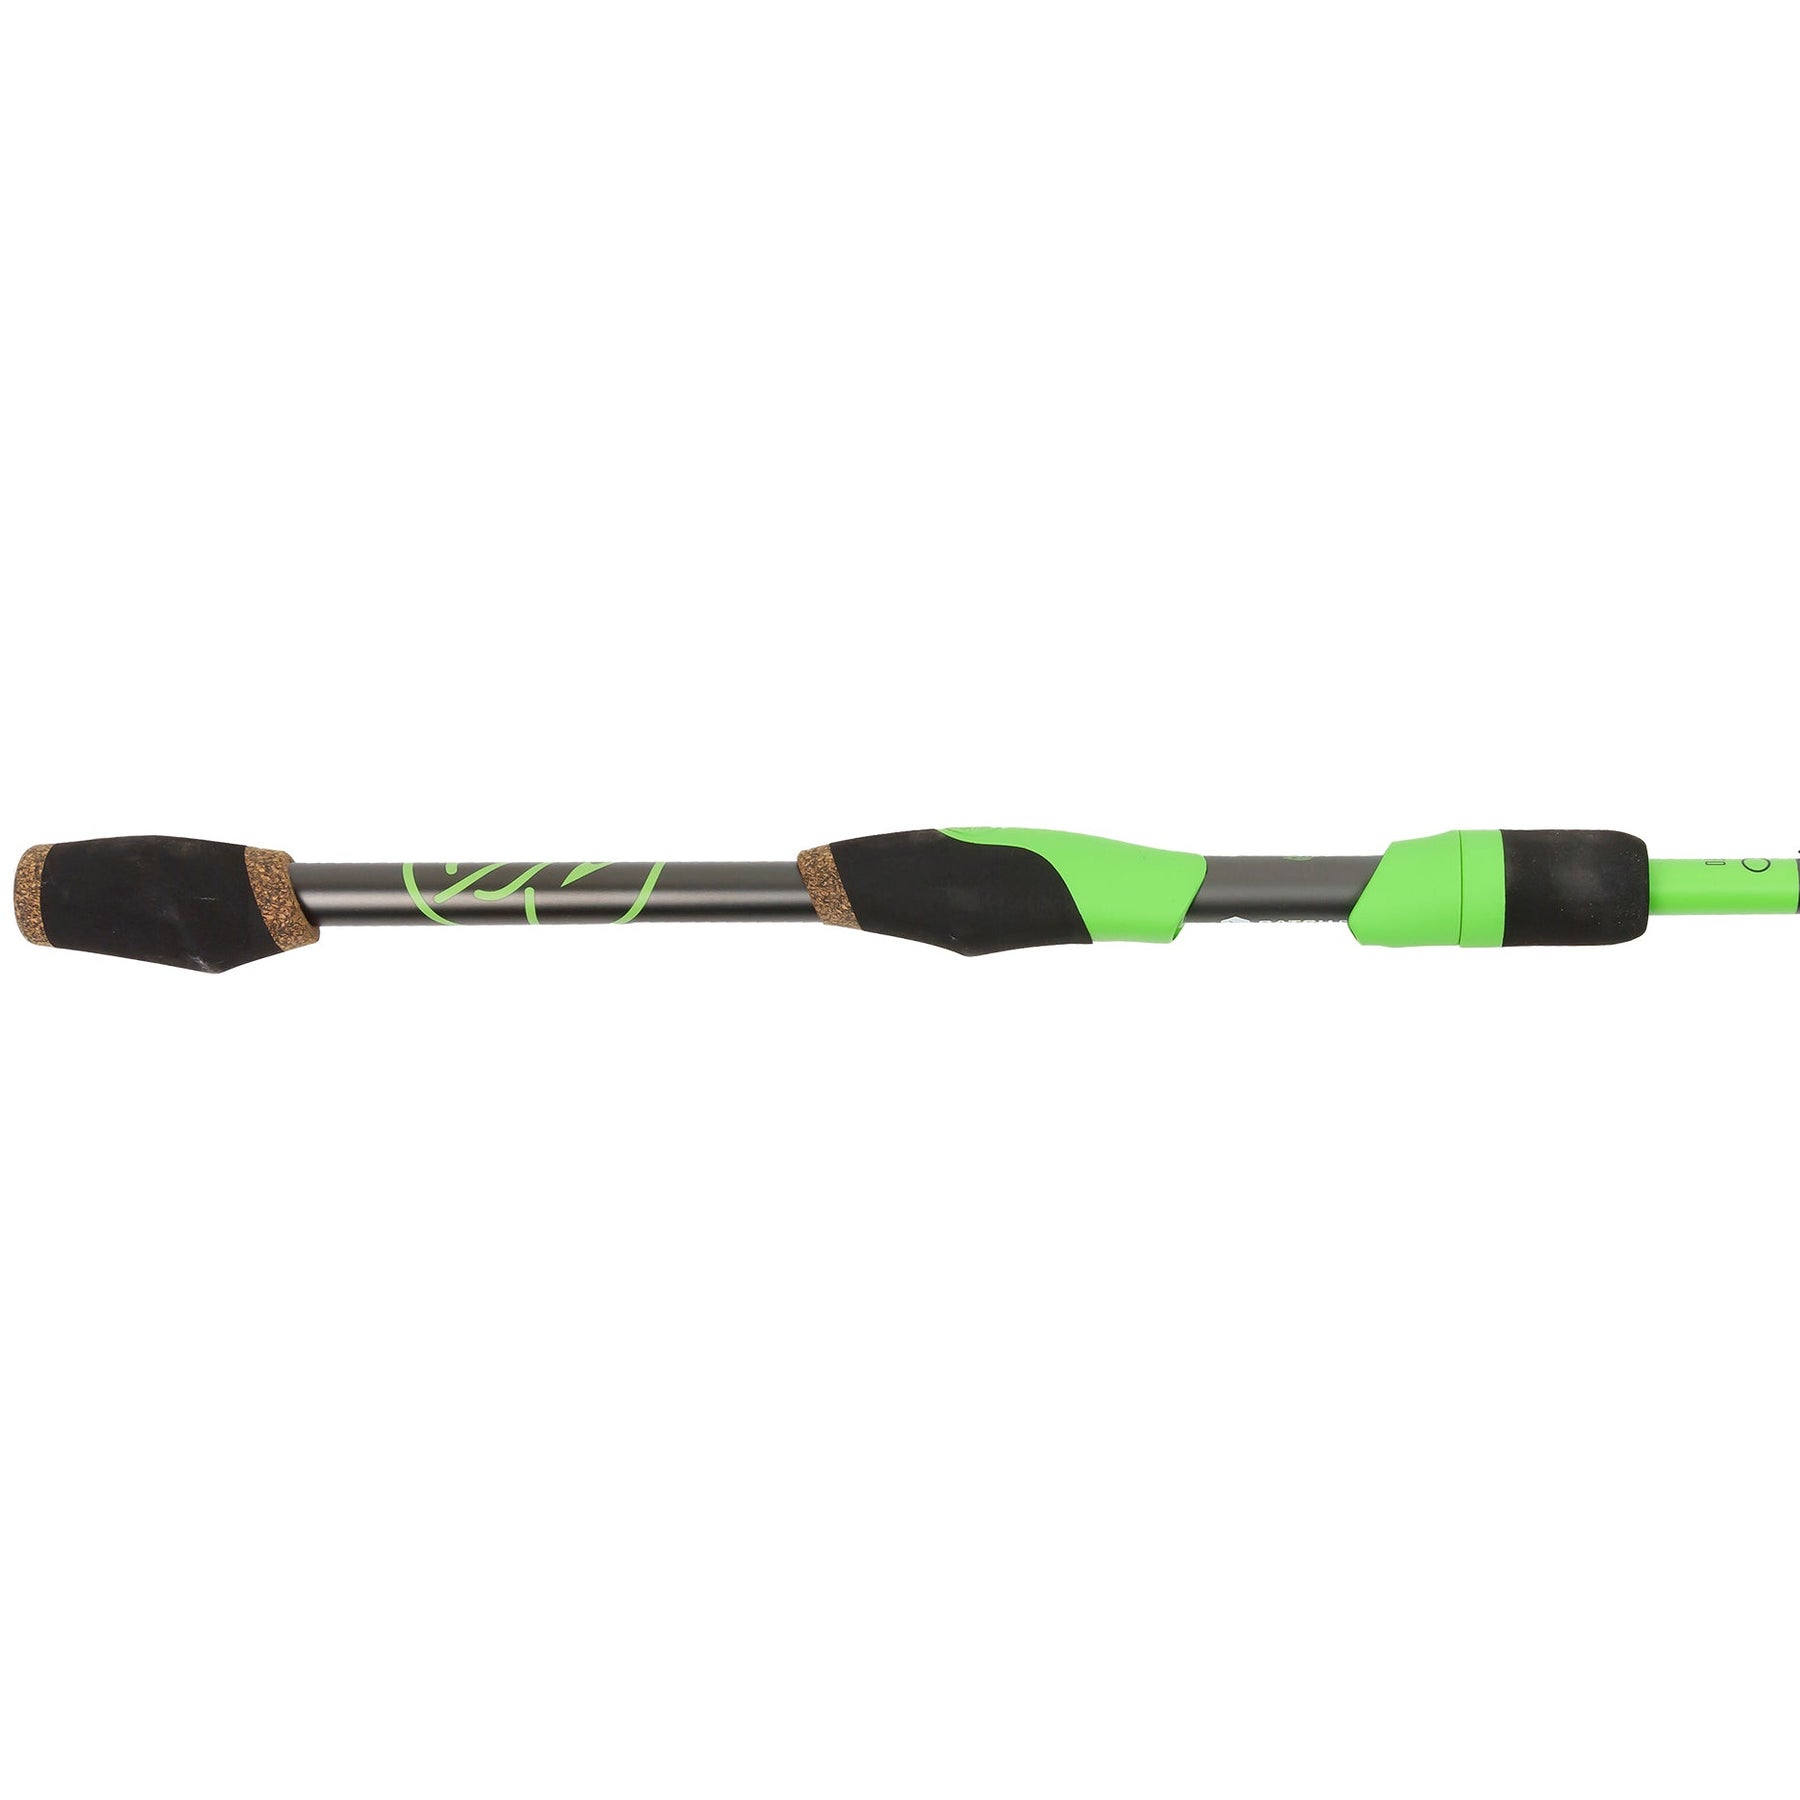 Browning Aggressor Spin Spinning Rod 6' 2 piece Fishing GRAPHITE ROD